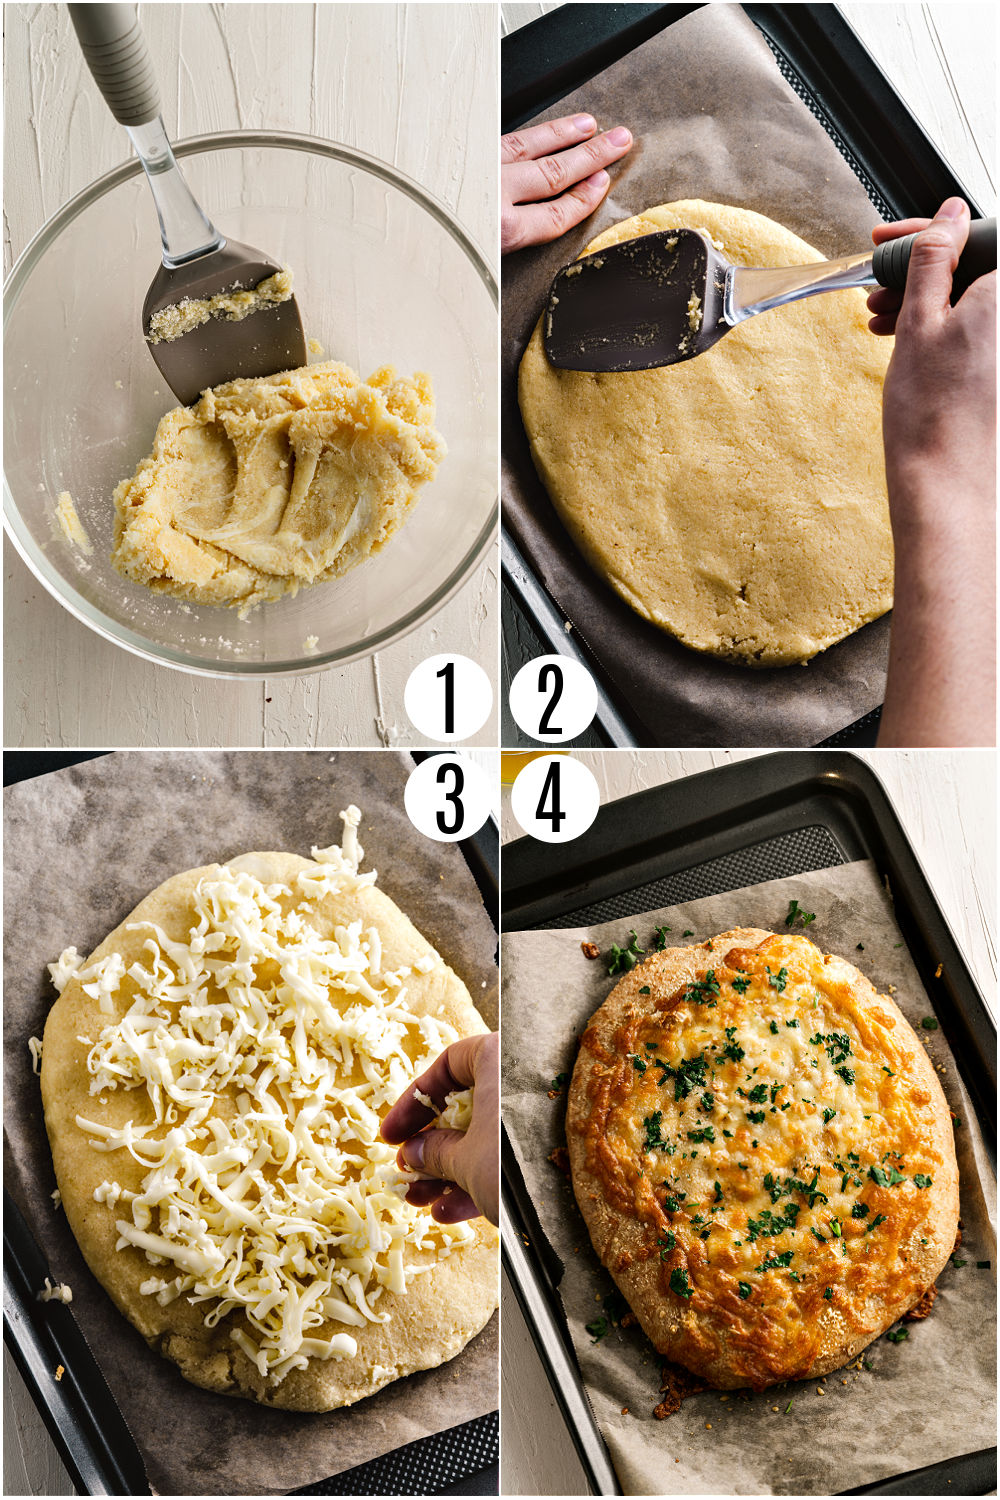 Step by step photos showing how to make gluten free garlic bread.